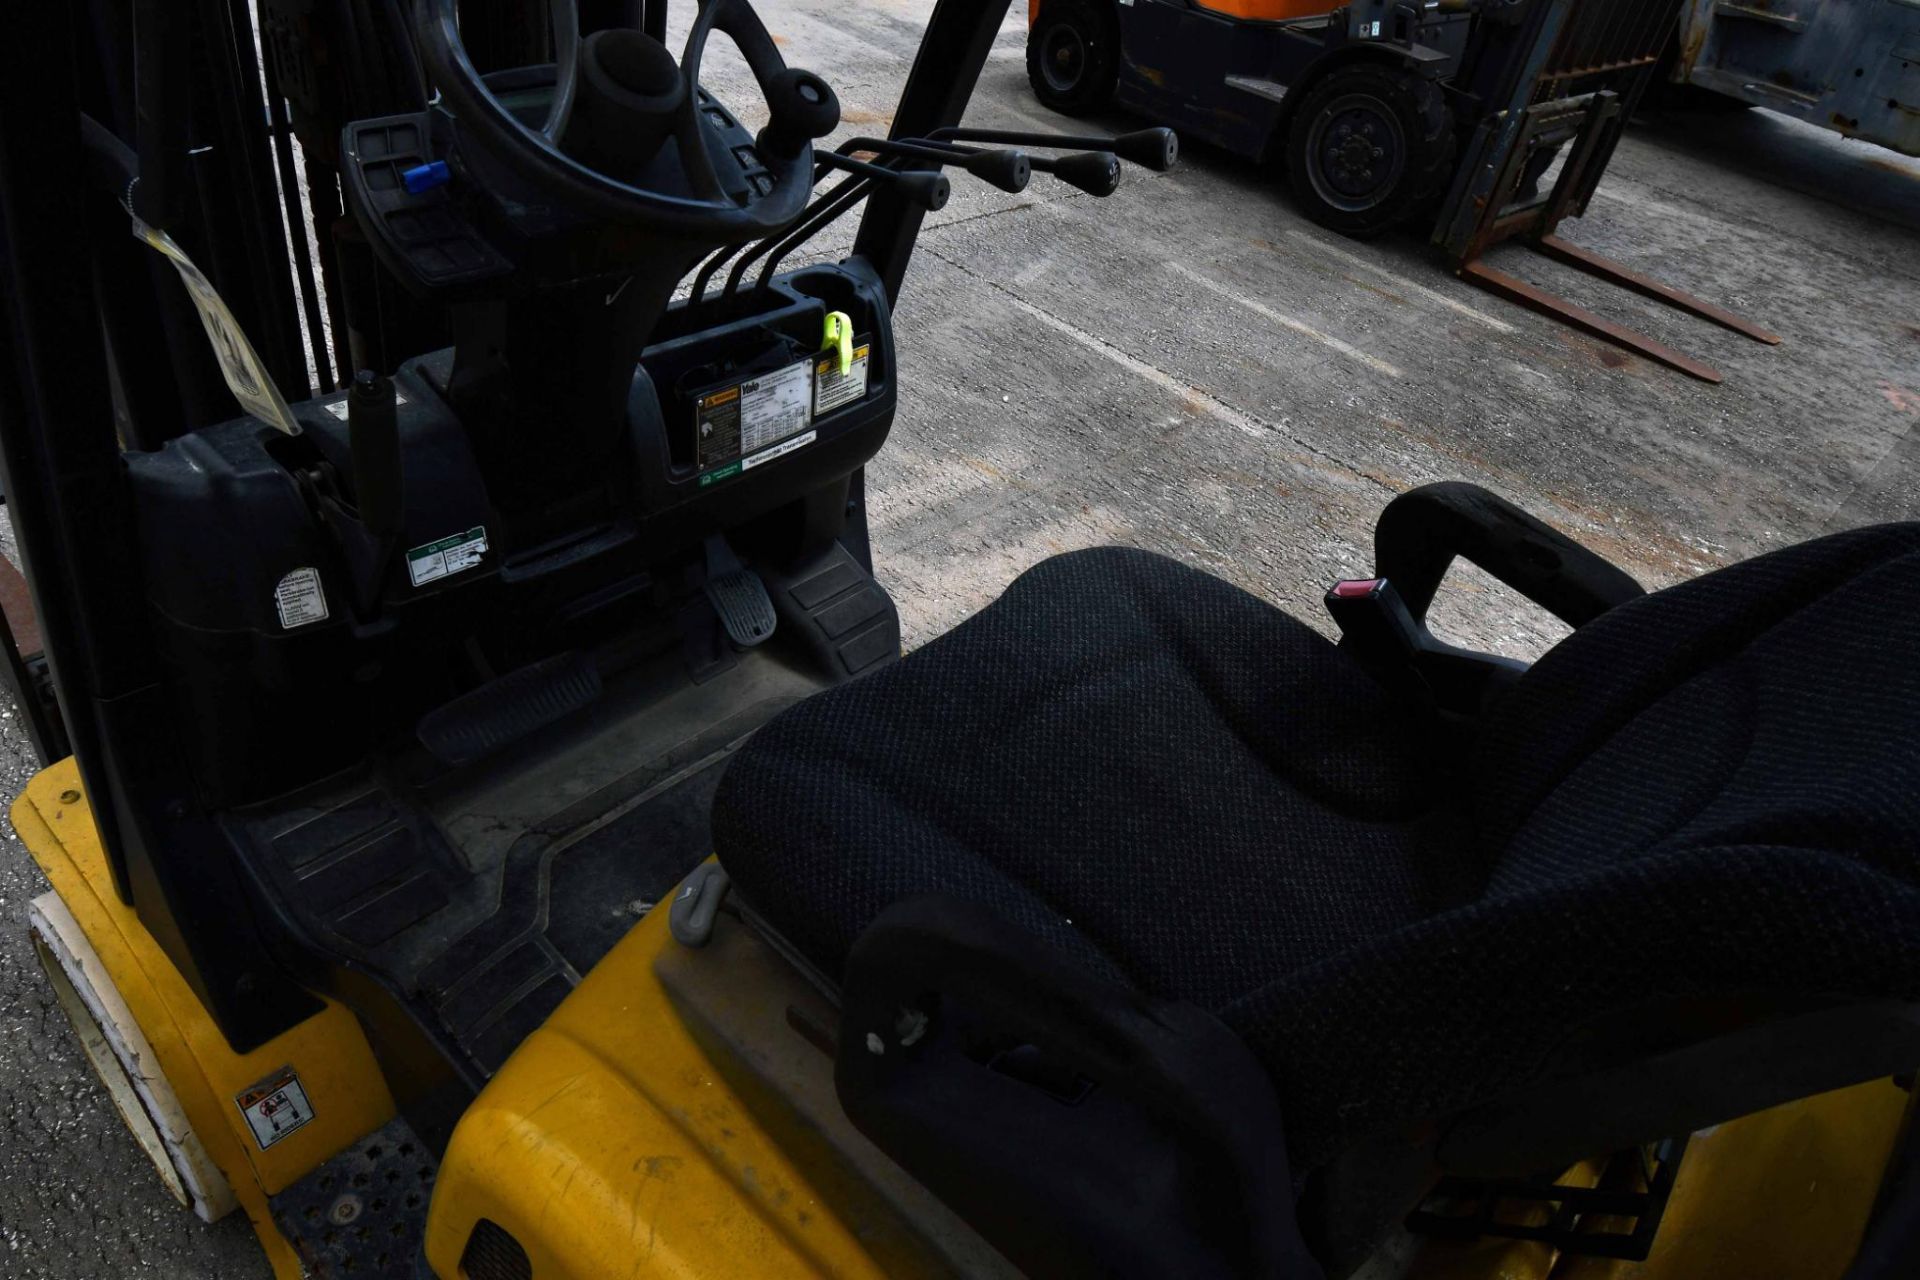 FORKLIFT, YALE VERACITOR 7,000-LB. BASE CAP. MDL. GLC070VXNDSE088, LPG, 6,500-lb. cap. as equipped, - Image 5 of 5